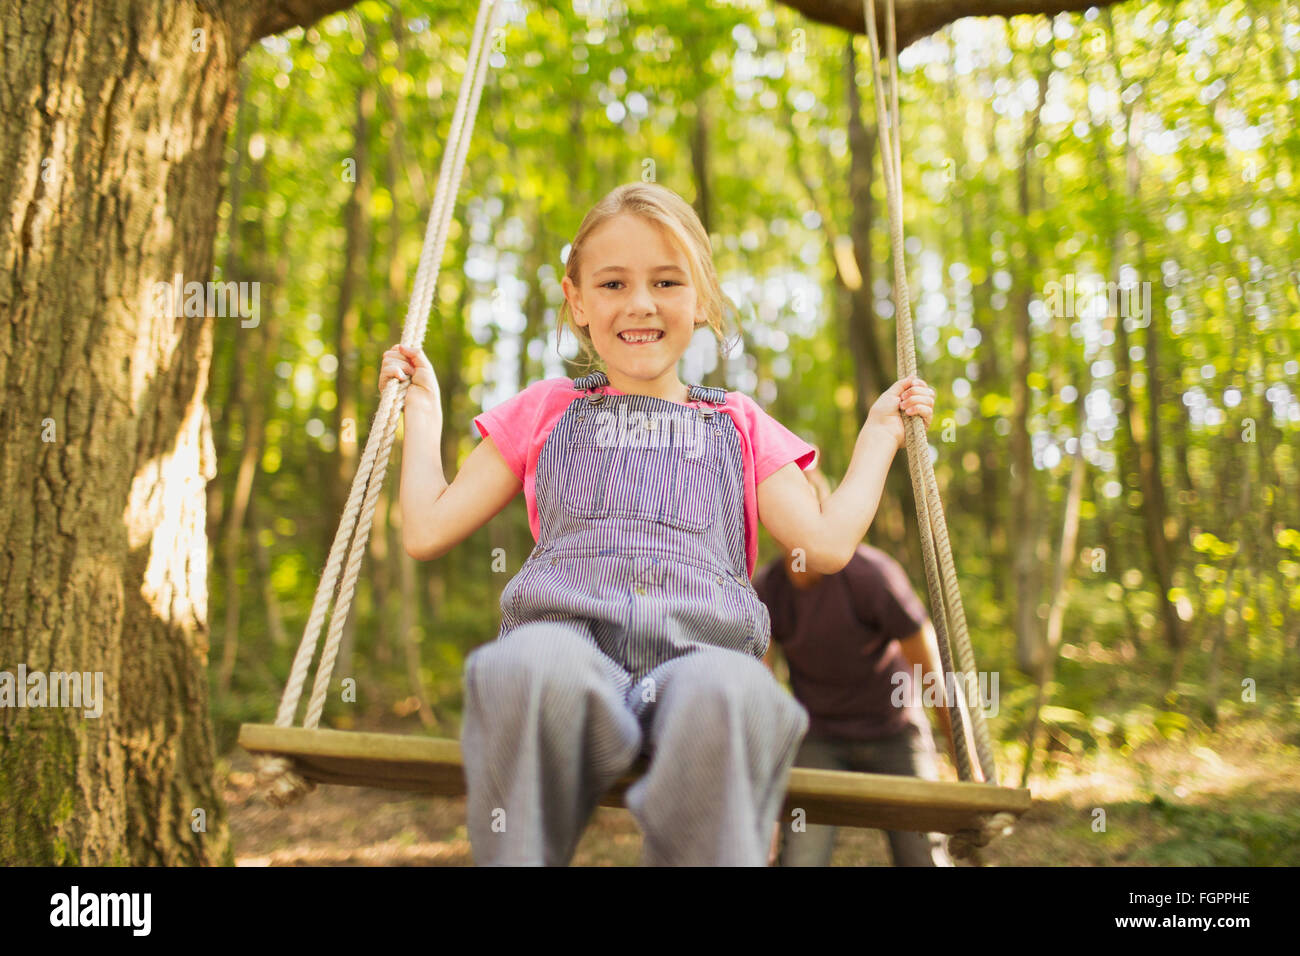 Portrait of smiling girl swinging sur rope swing in forest Banque D'Images